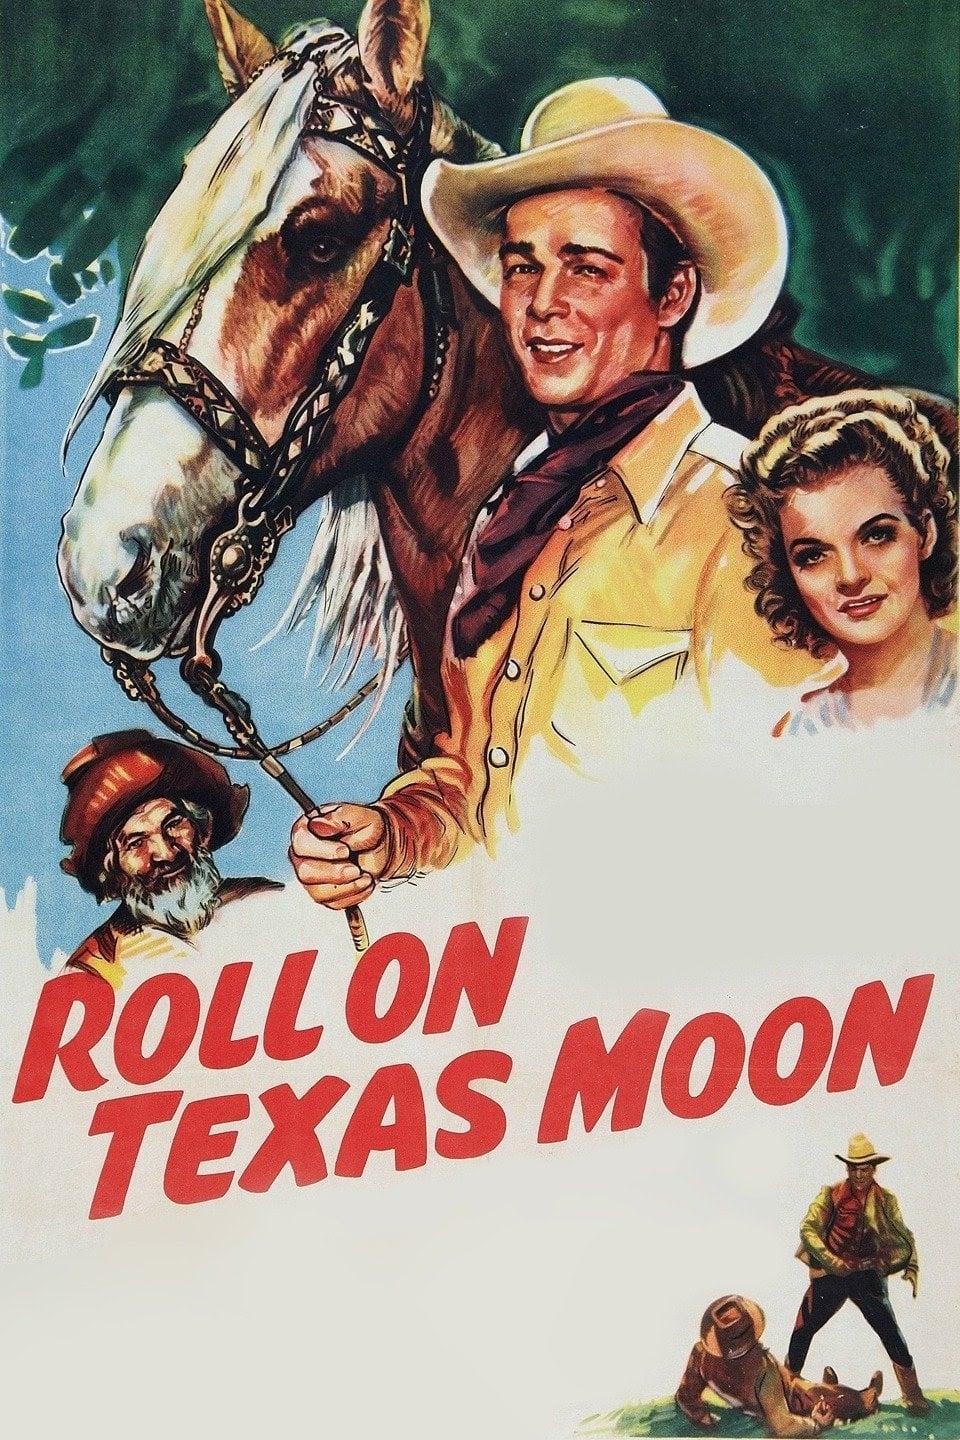 Roll on Texas Moon poster